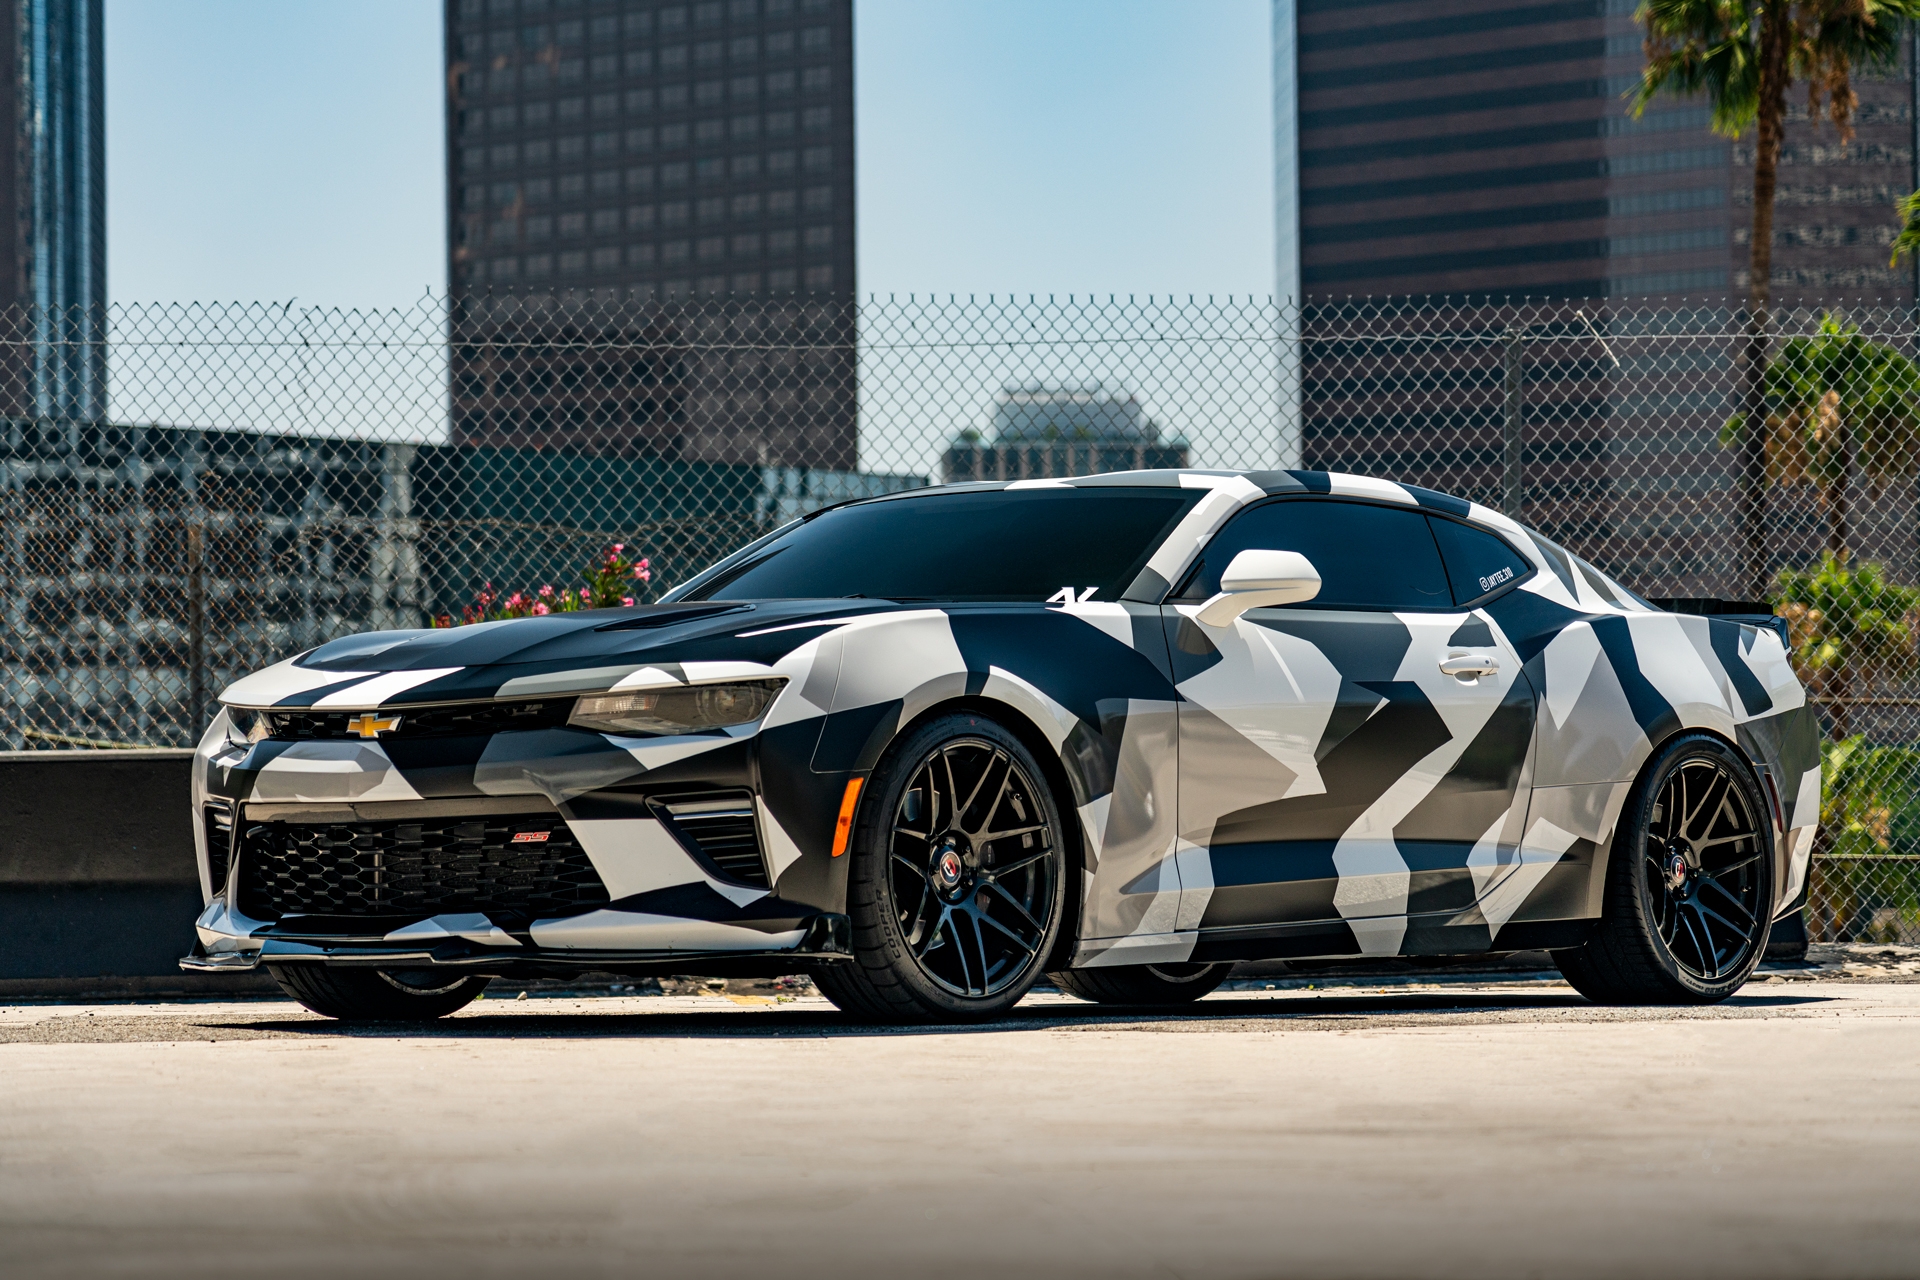 Curva Concepts C300 Aftermarket Wheels on a Camo Wrapped Chevy Camaro